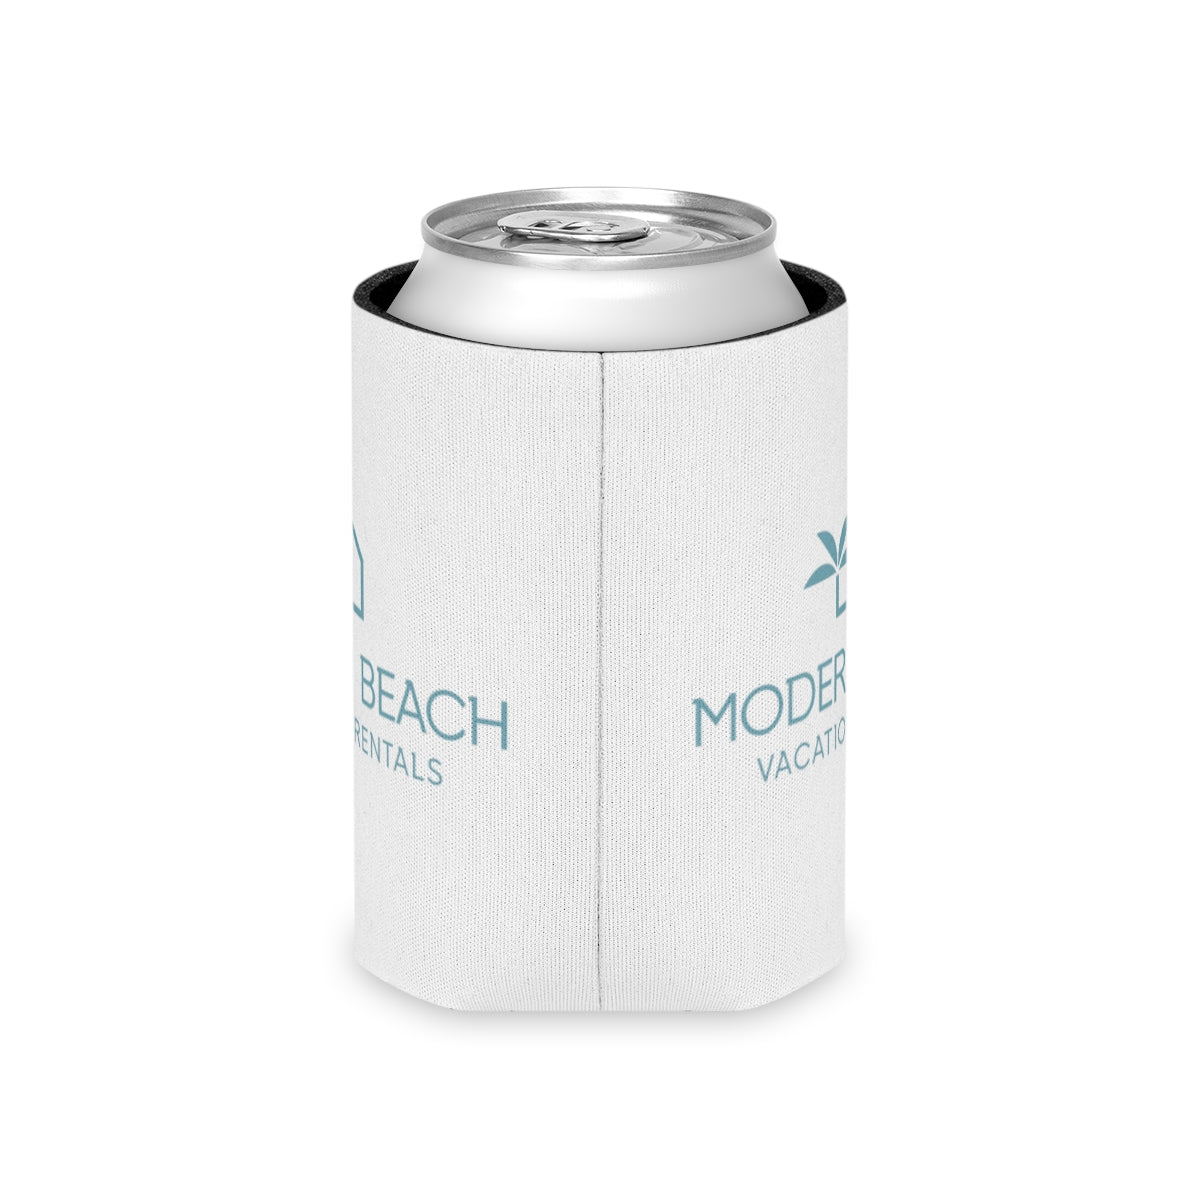 Modern Beach Vacation Rentals Basic Logo White Can Coozie Cooler